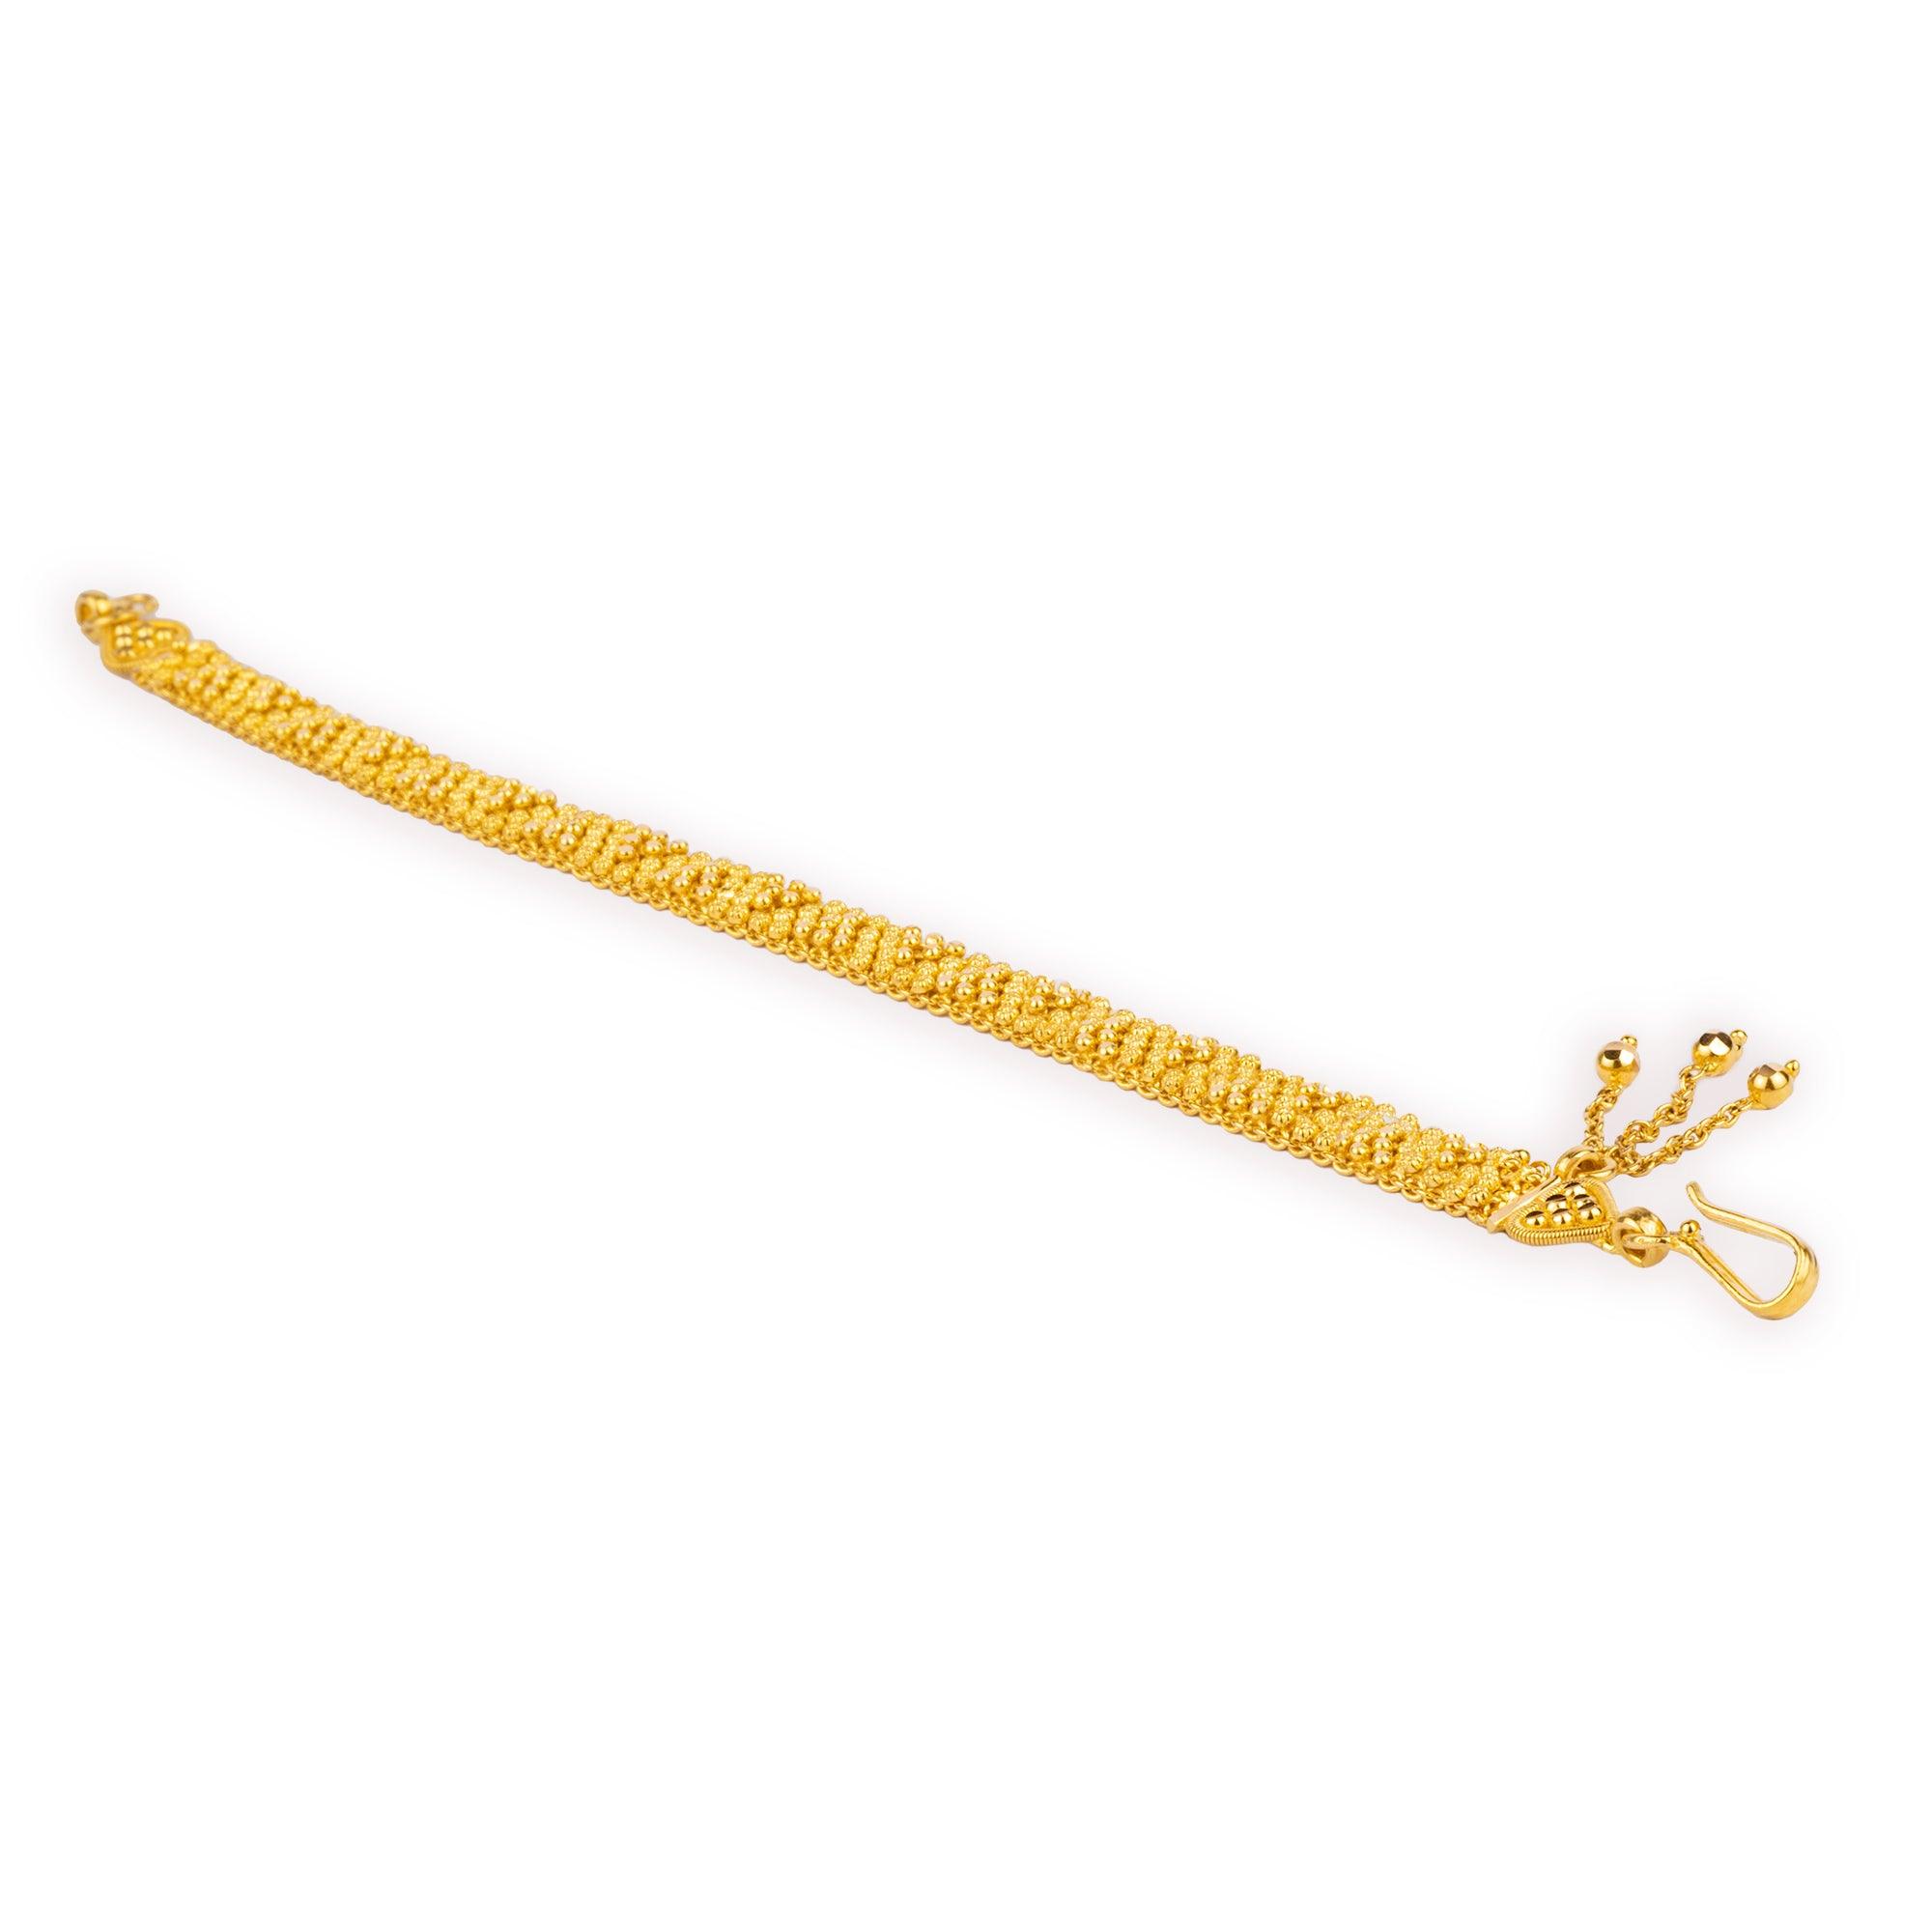 22ct Gold Ladies Bracelet with Hook Clasp and Three Drops (15.4g) LBR-3975